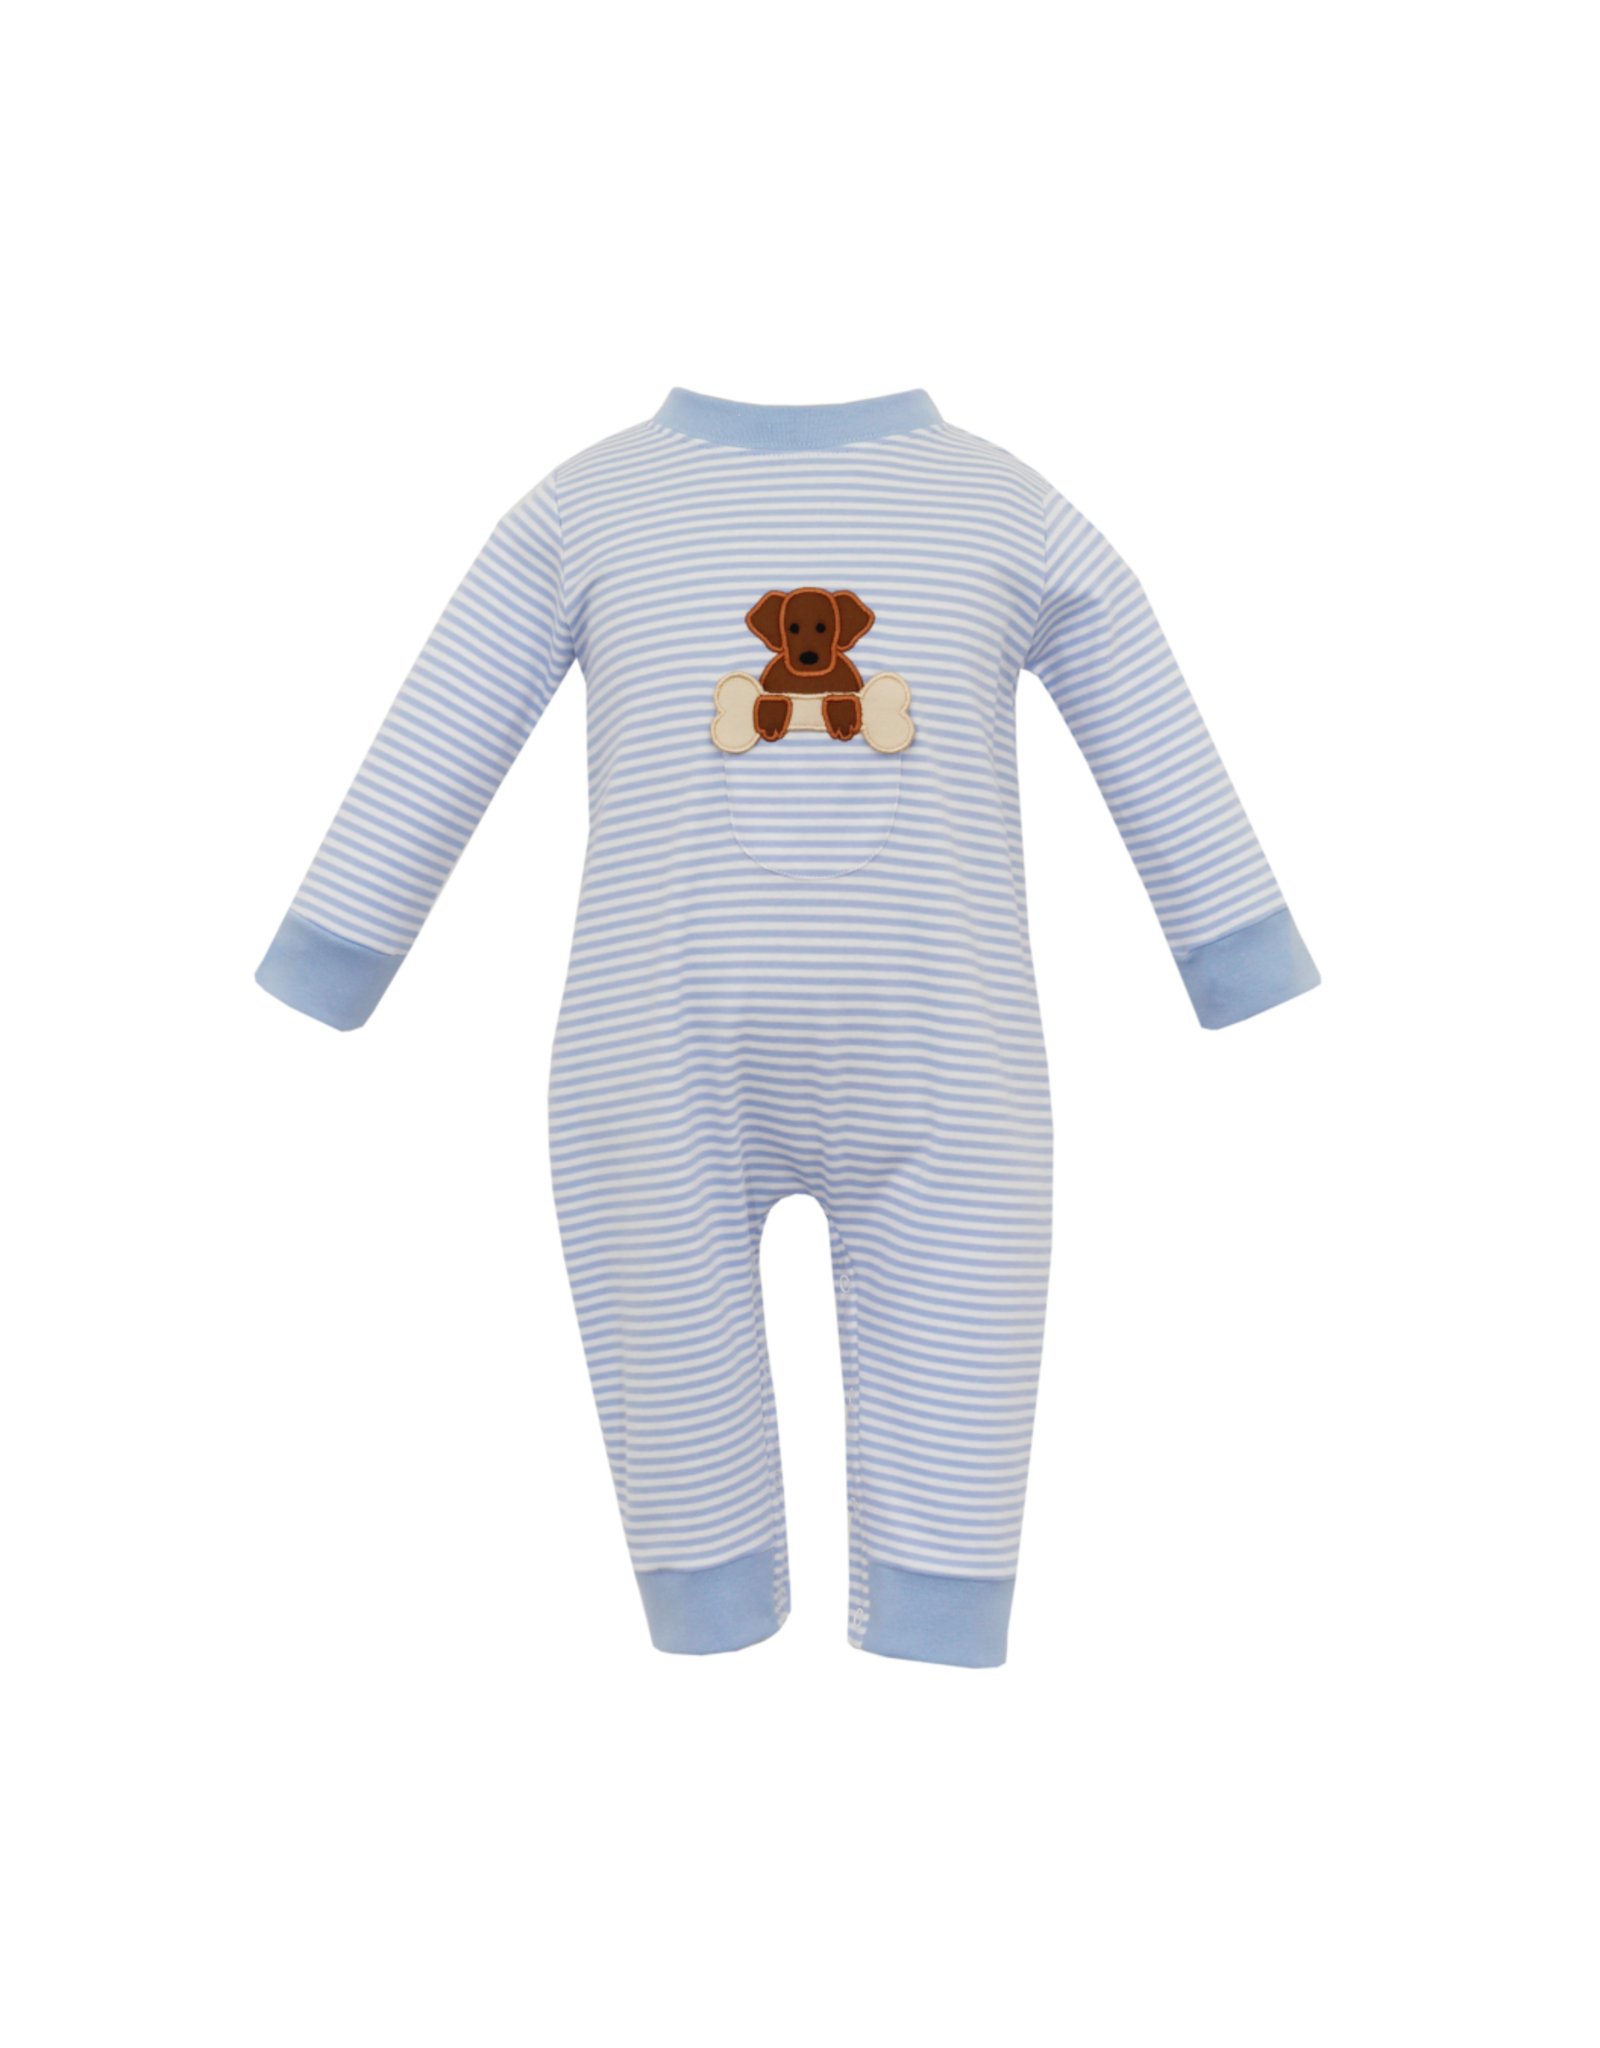 Claire and Charlie Blue Stripe Knit LS Puppy Pocket Romper